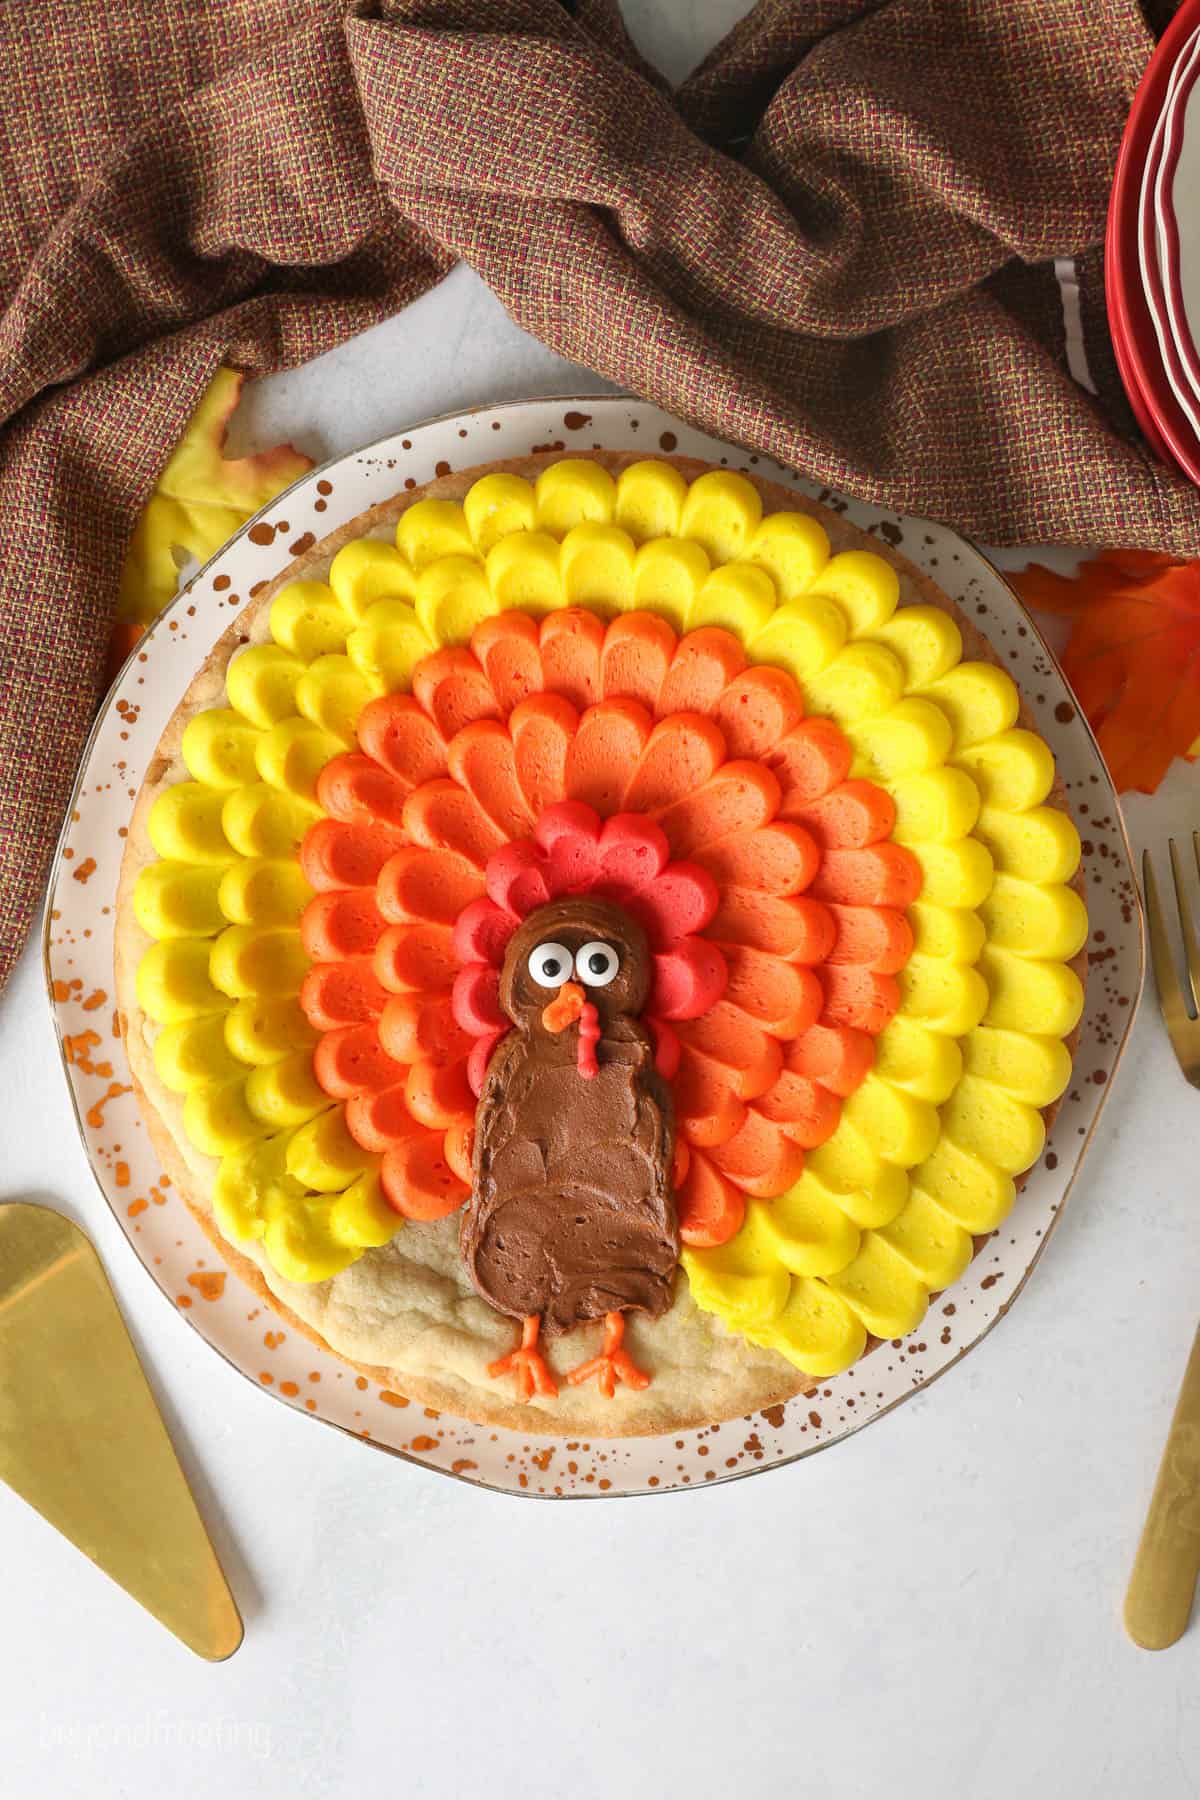 A cookie cake decorated with buttercream to look like a turkey on a plate surrounded with plates, napkin and utensils.